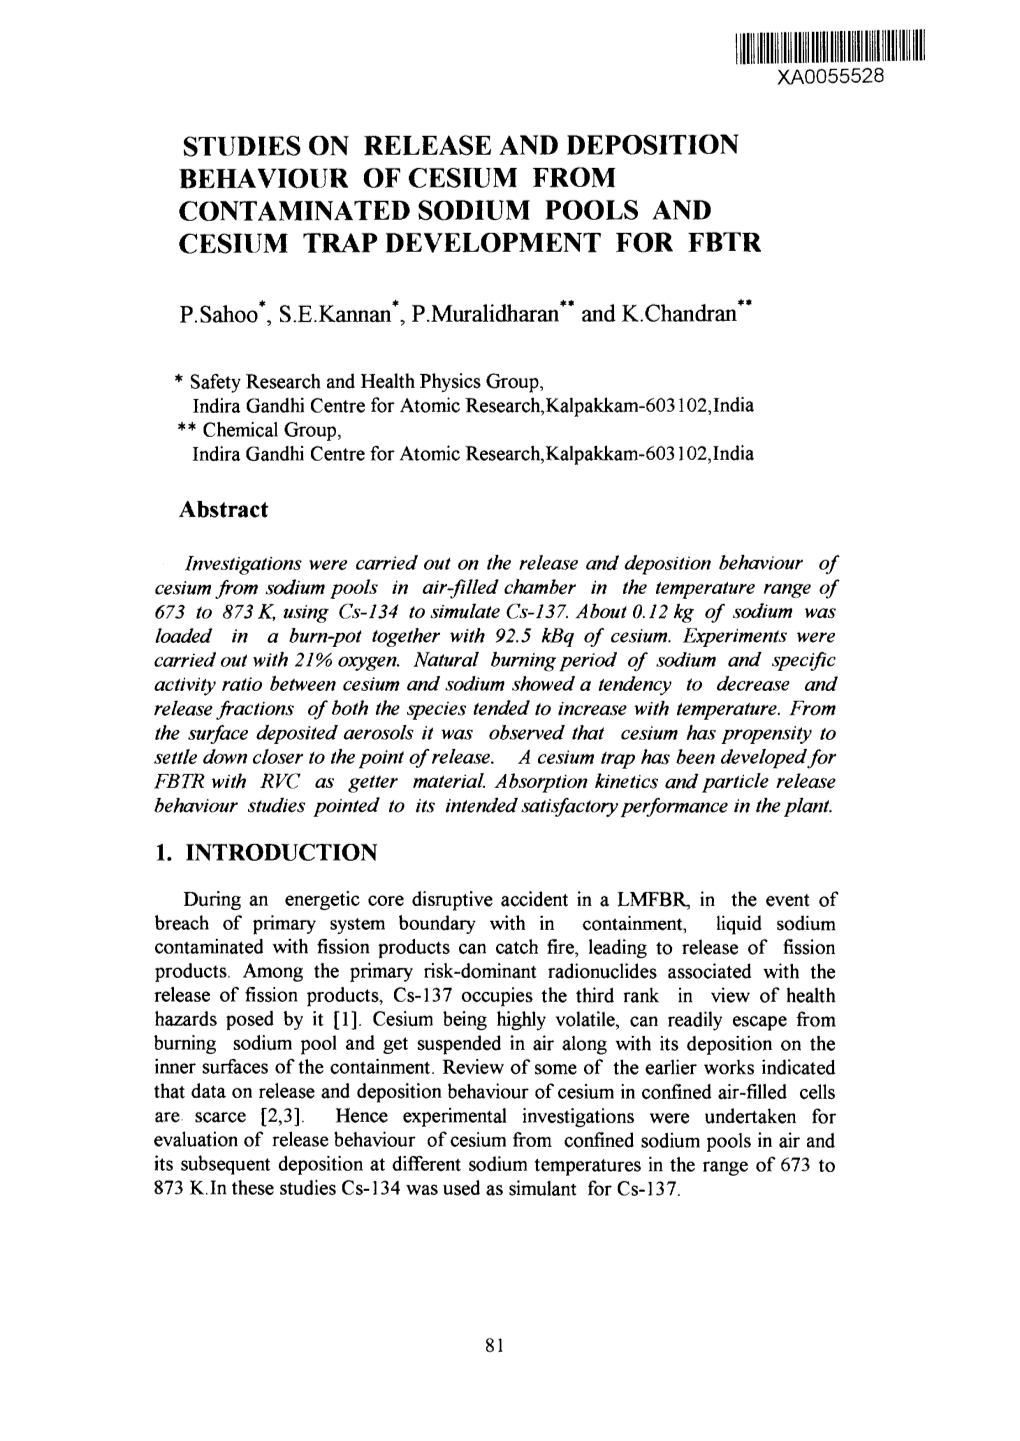 Studies on Release and Deposition Behaviour of Cesium from Contaminated Sodium Pools and Cesium Trap Development for Fbtr